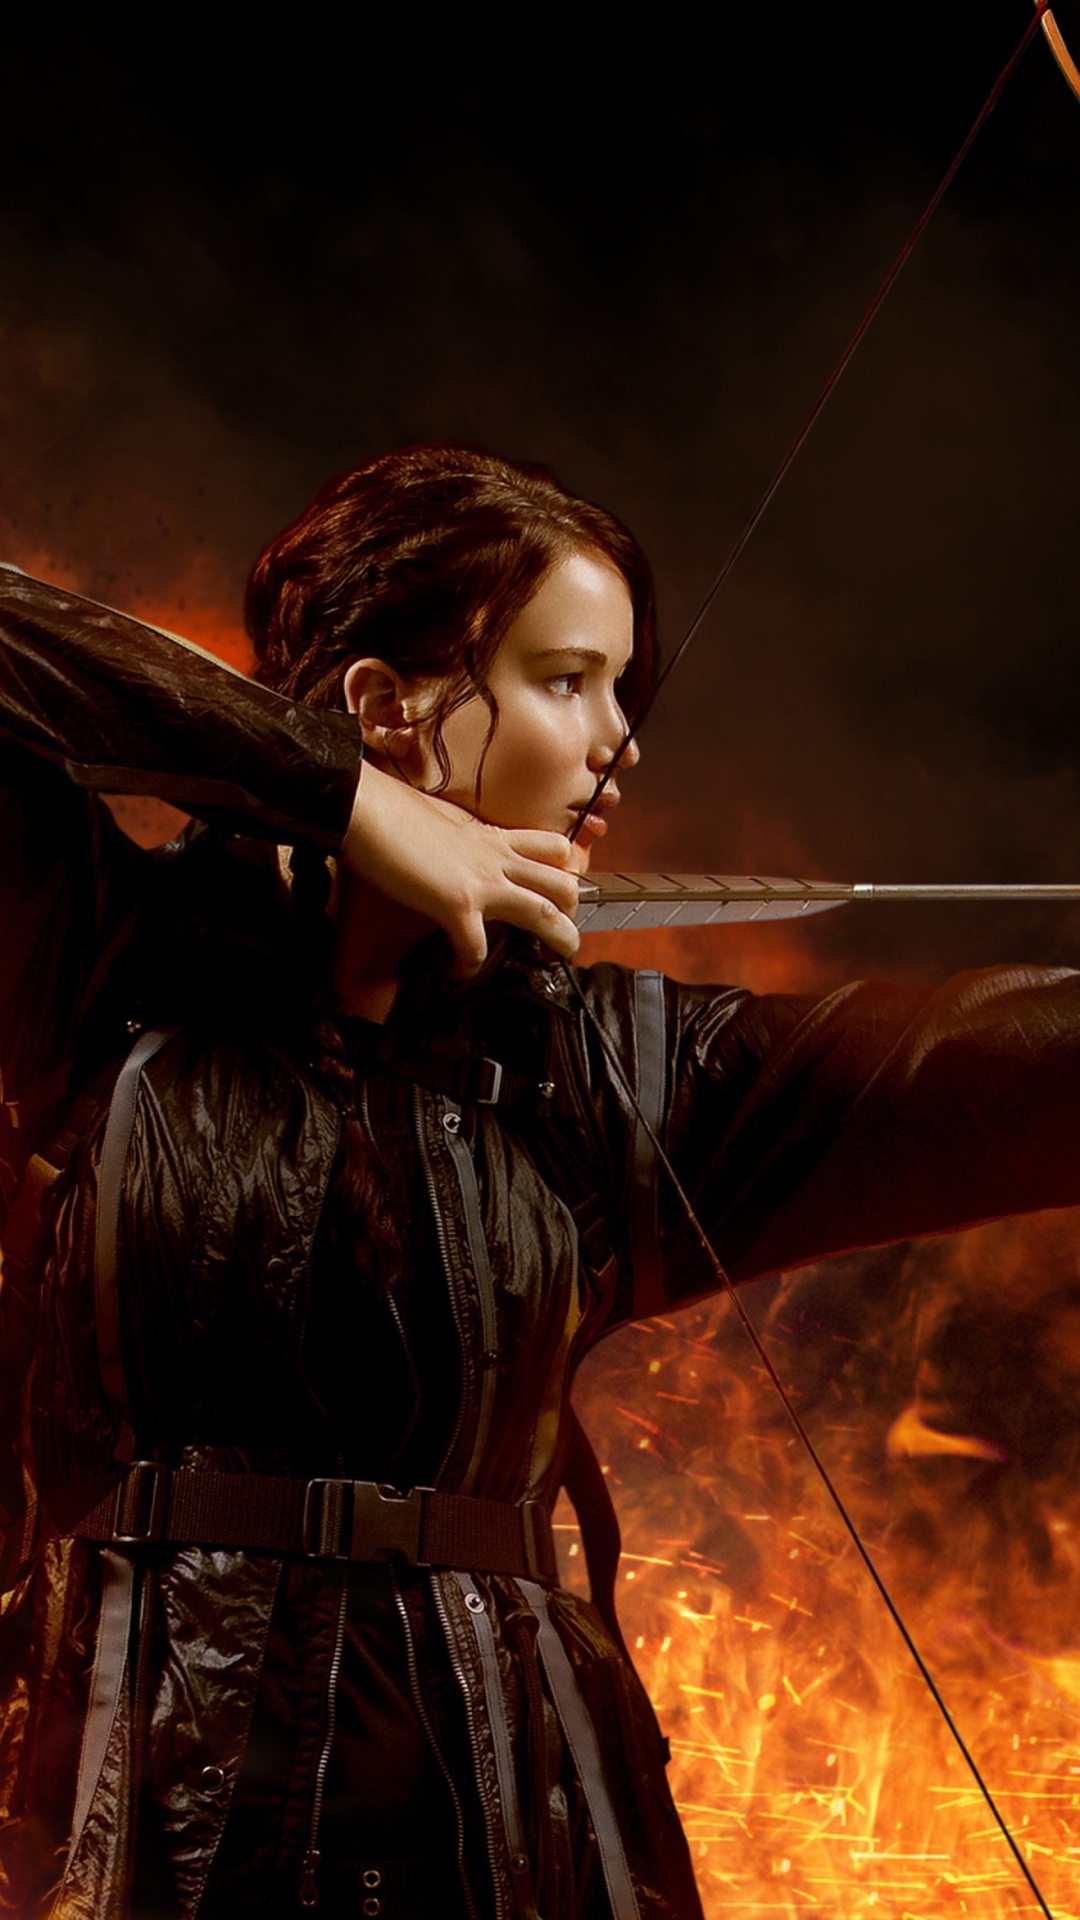 Jennifer Lawrence In Hunger Games Wallpaper for iPhone 6 Plus